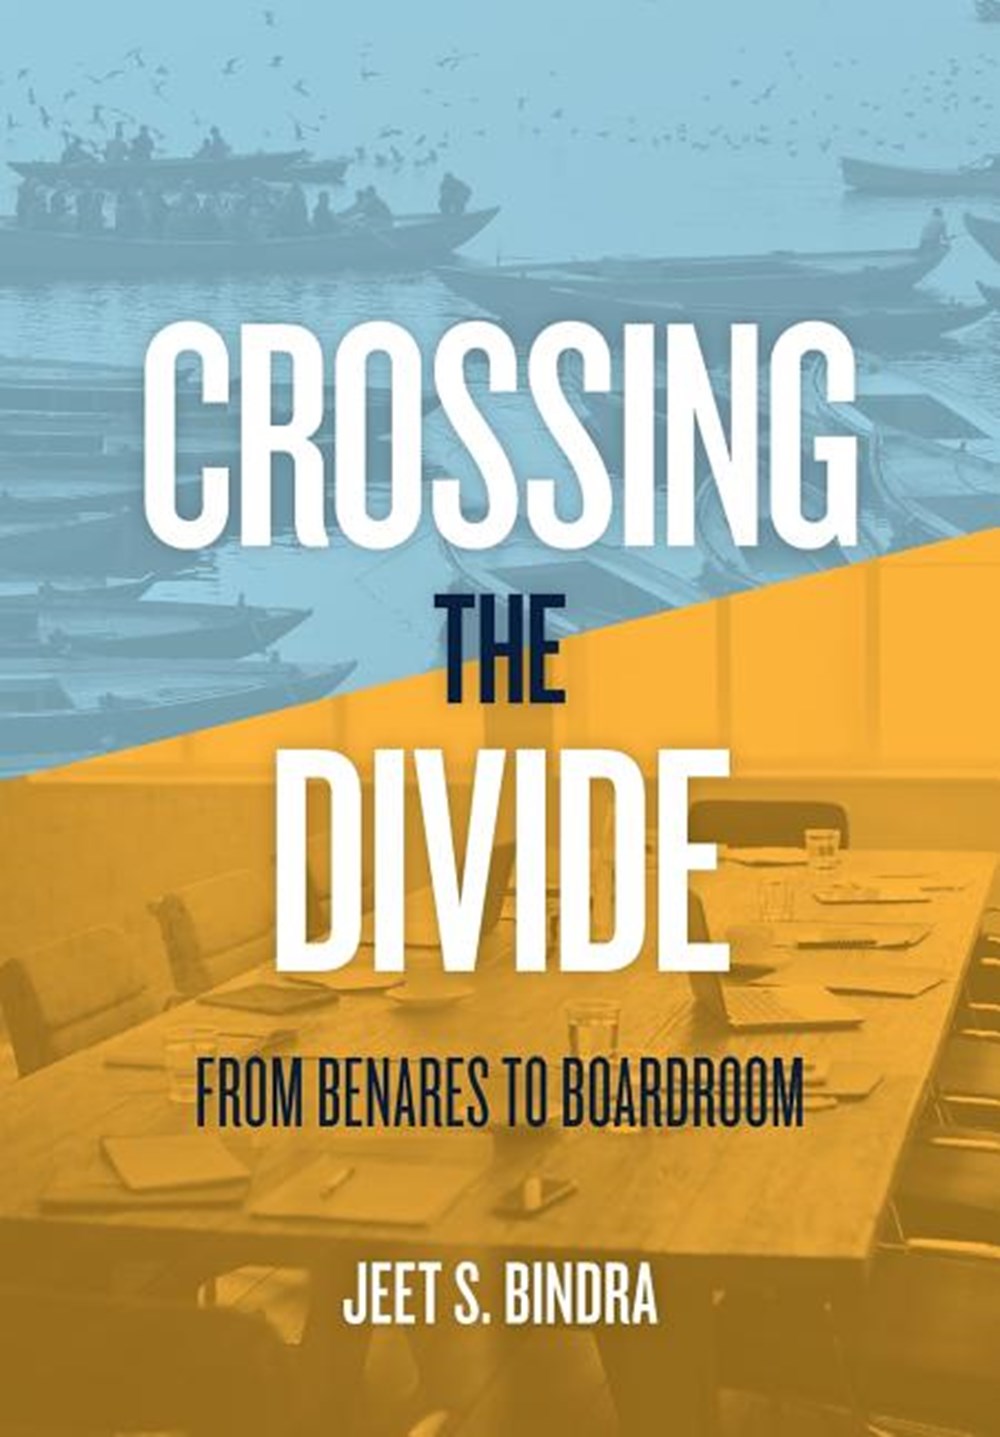 Crossing the Divide: From Benares to Boardroom